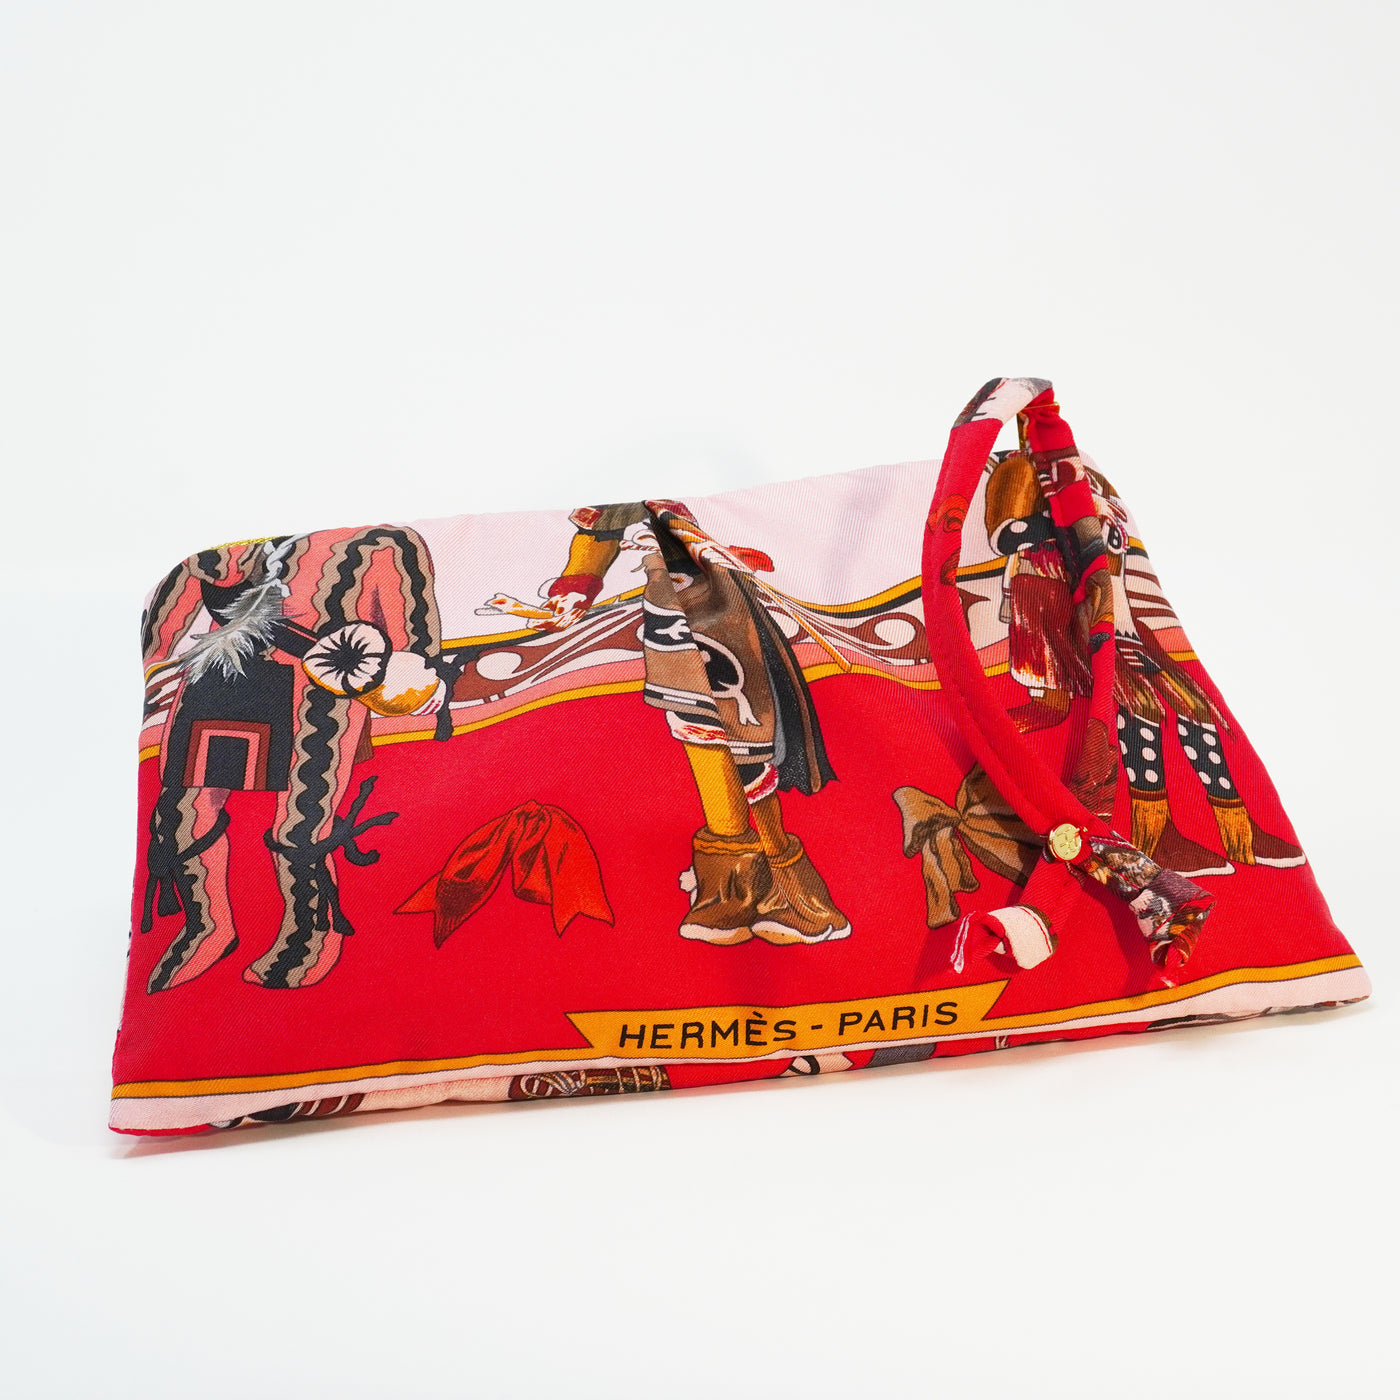 "Kachinas" Scarf Bag (Upcycled from Hermes Scarf) Party Clutch Hampton Road Designs   